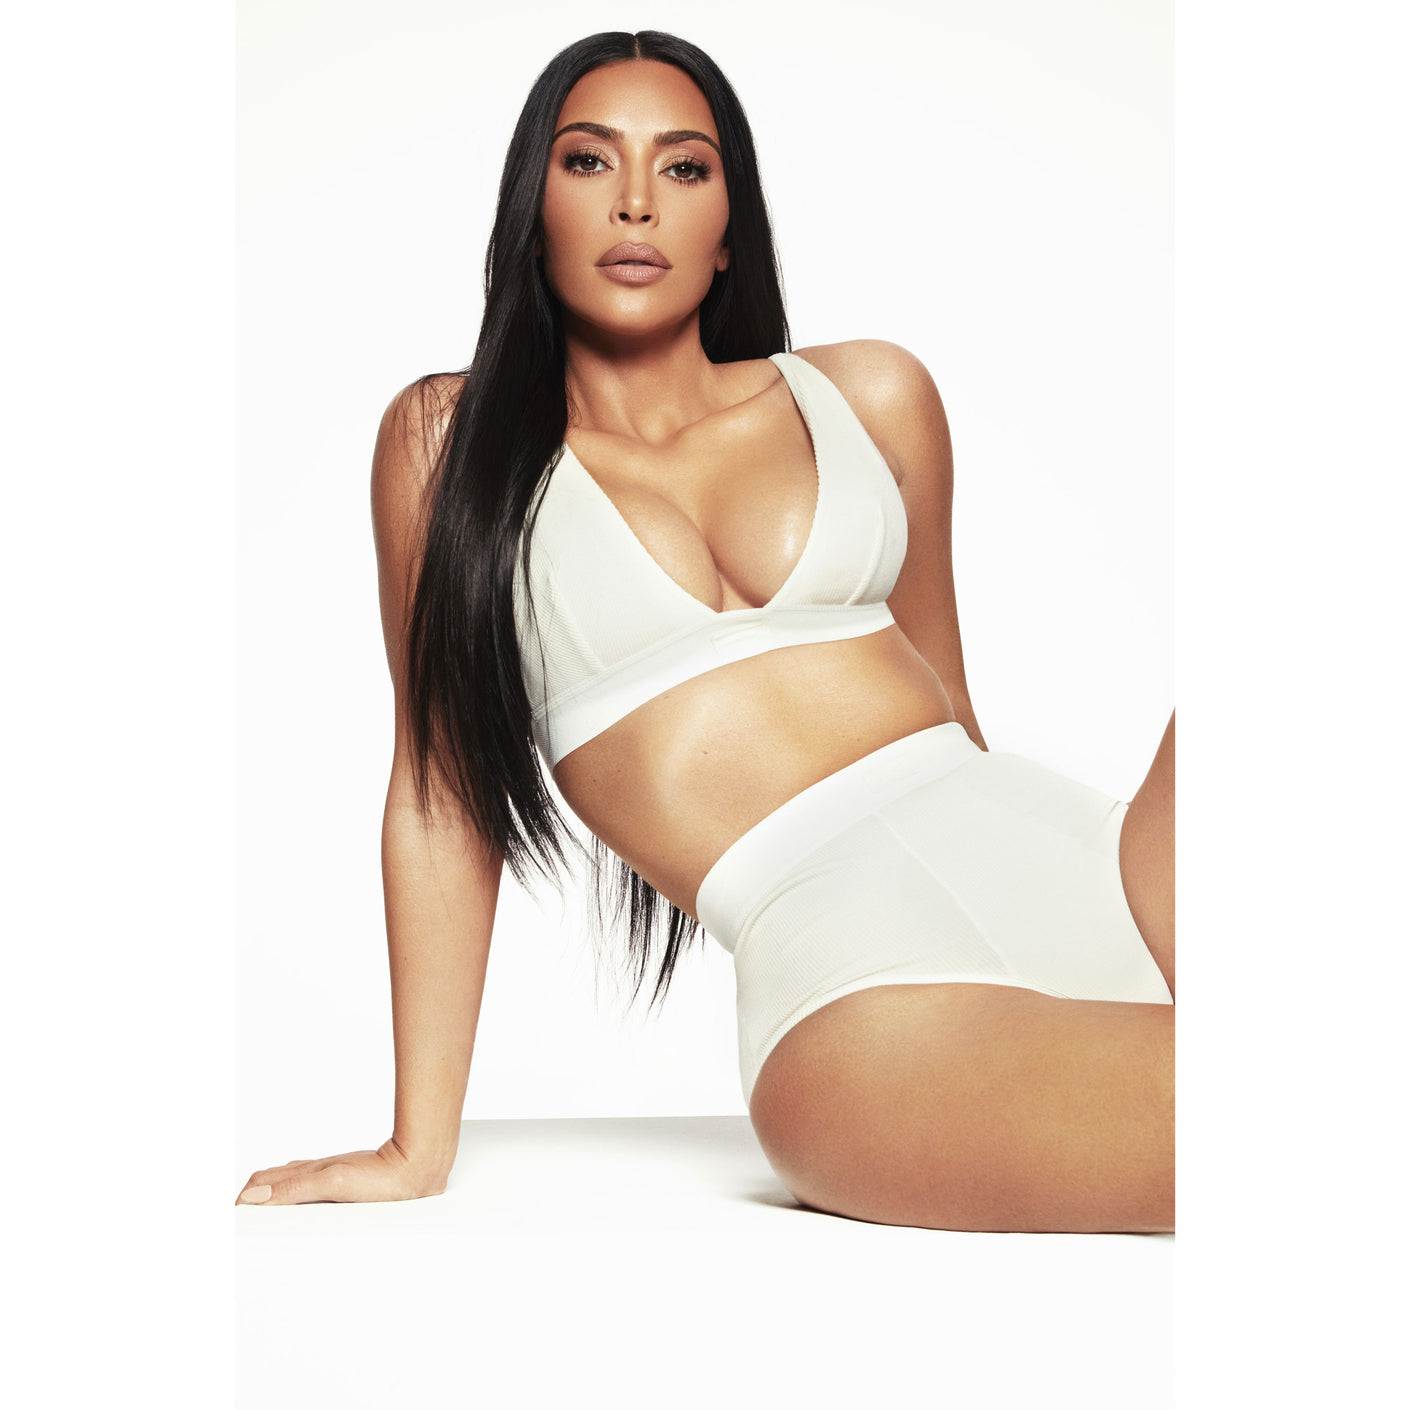 SKIMS - Kim Kardashian West wears the Cotton Rib Tank ($34, available in  select sizes in Bone, Iris Mica, Mineral, and Soot) and the Cotton Rib  Brief ($28, available in select sizes